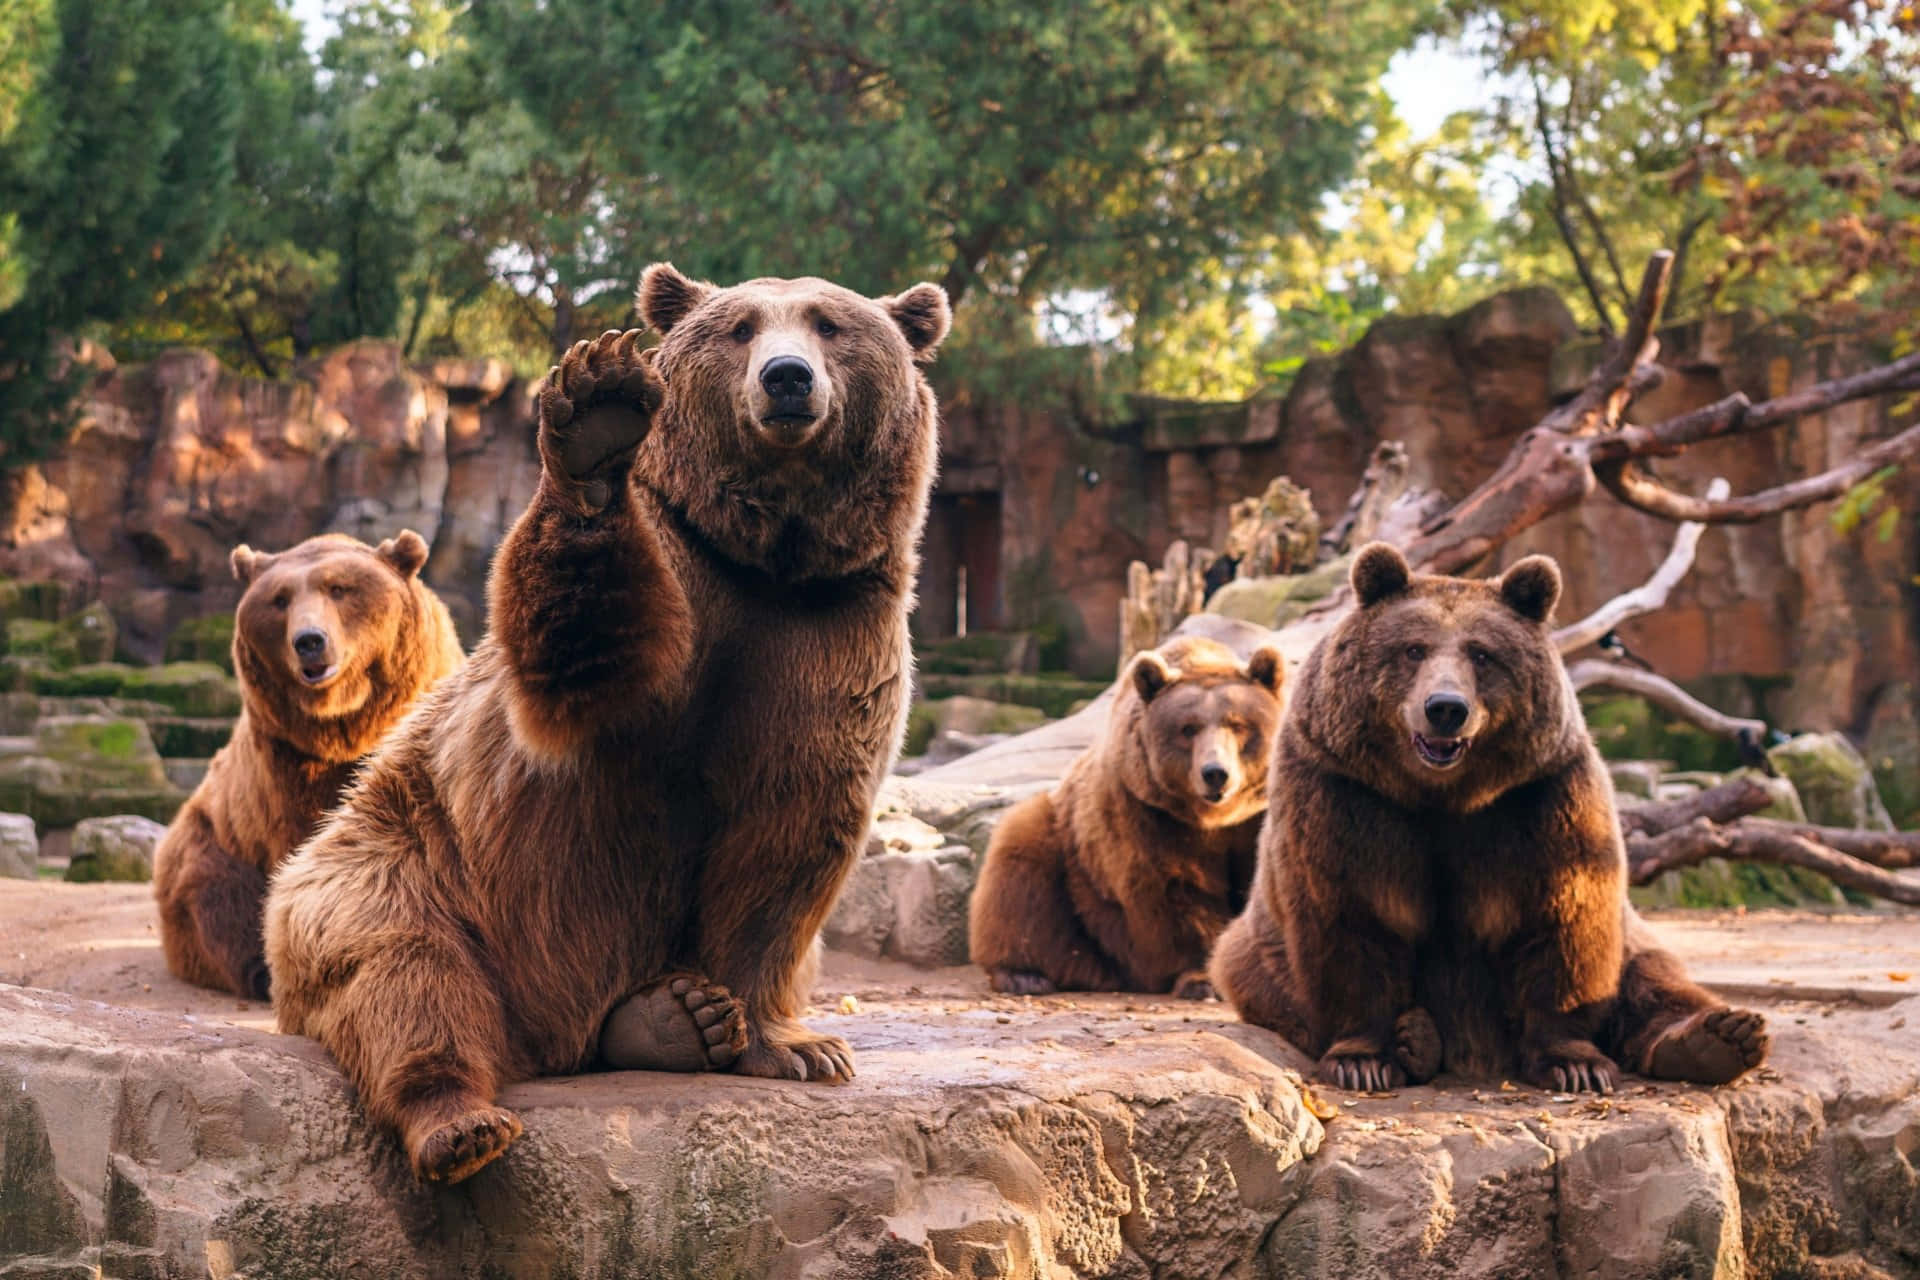 Caption: Majestic Grizzly Bears At The Zoo Wallpaper